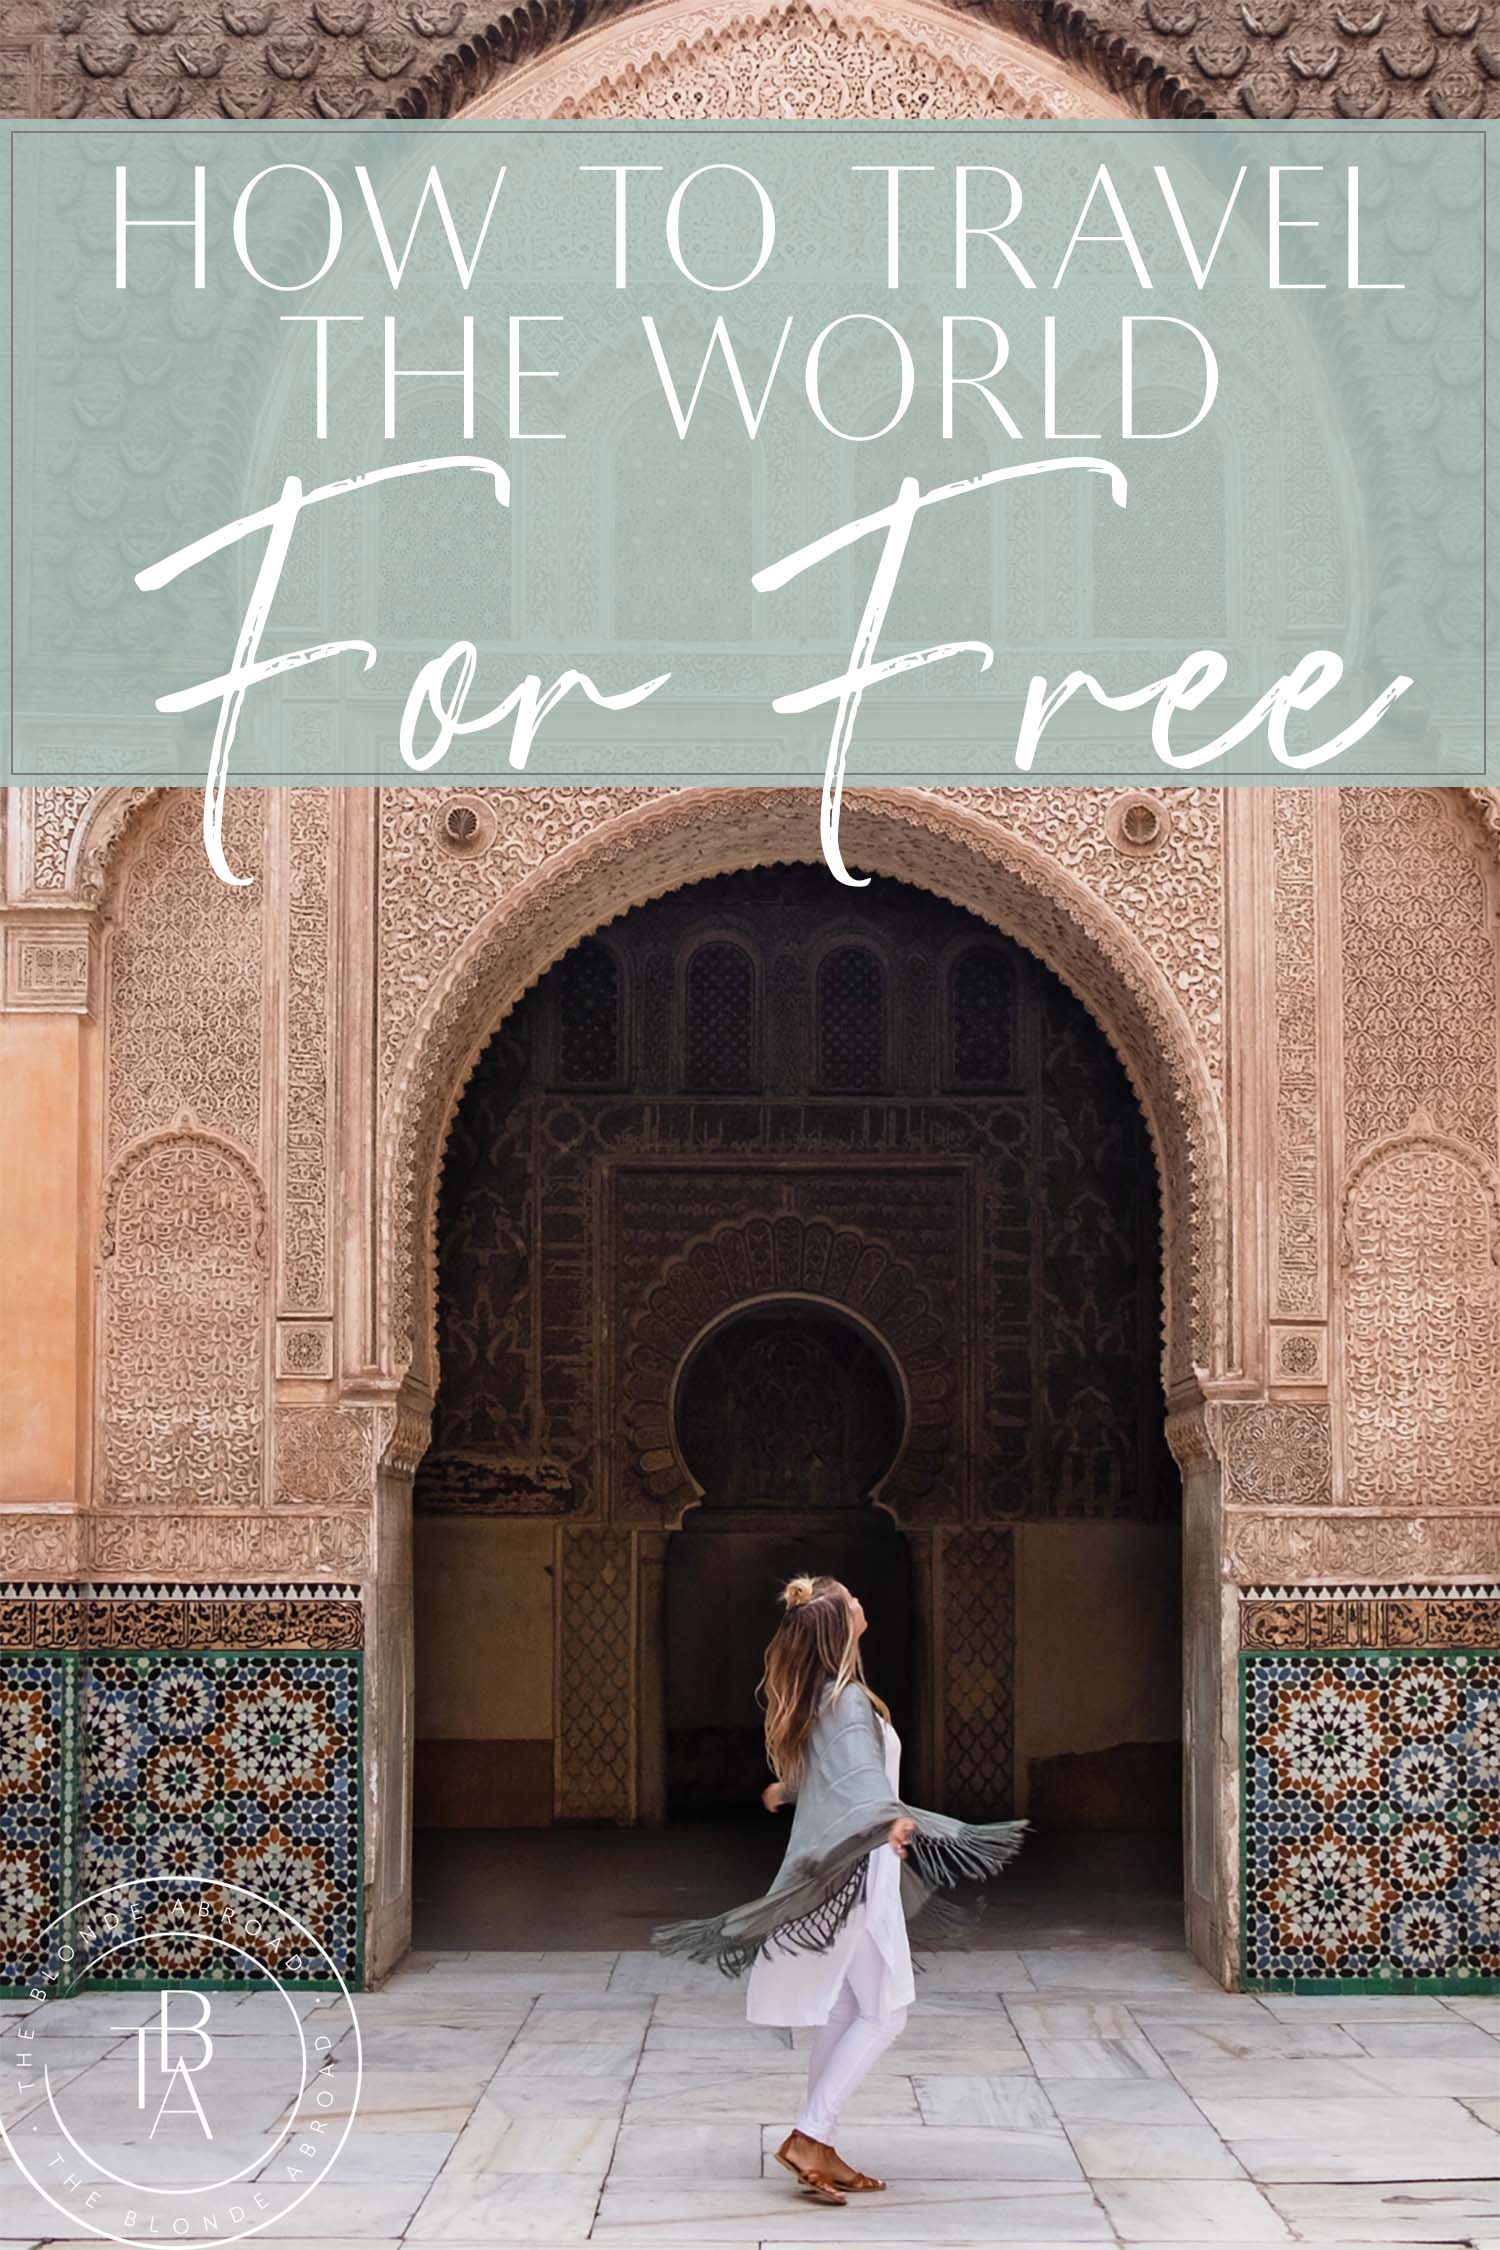 How to Travel the World For Free